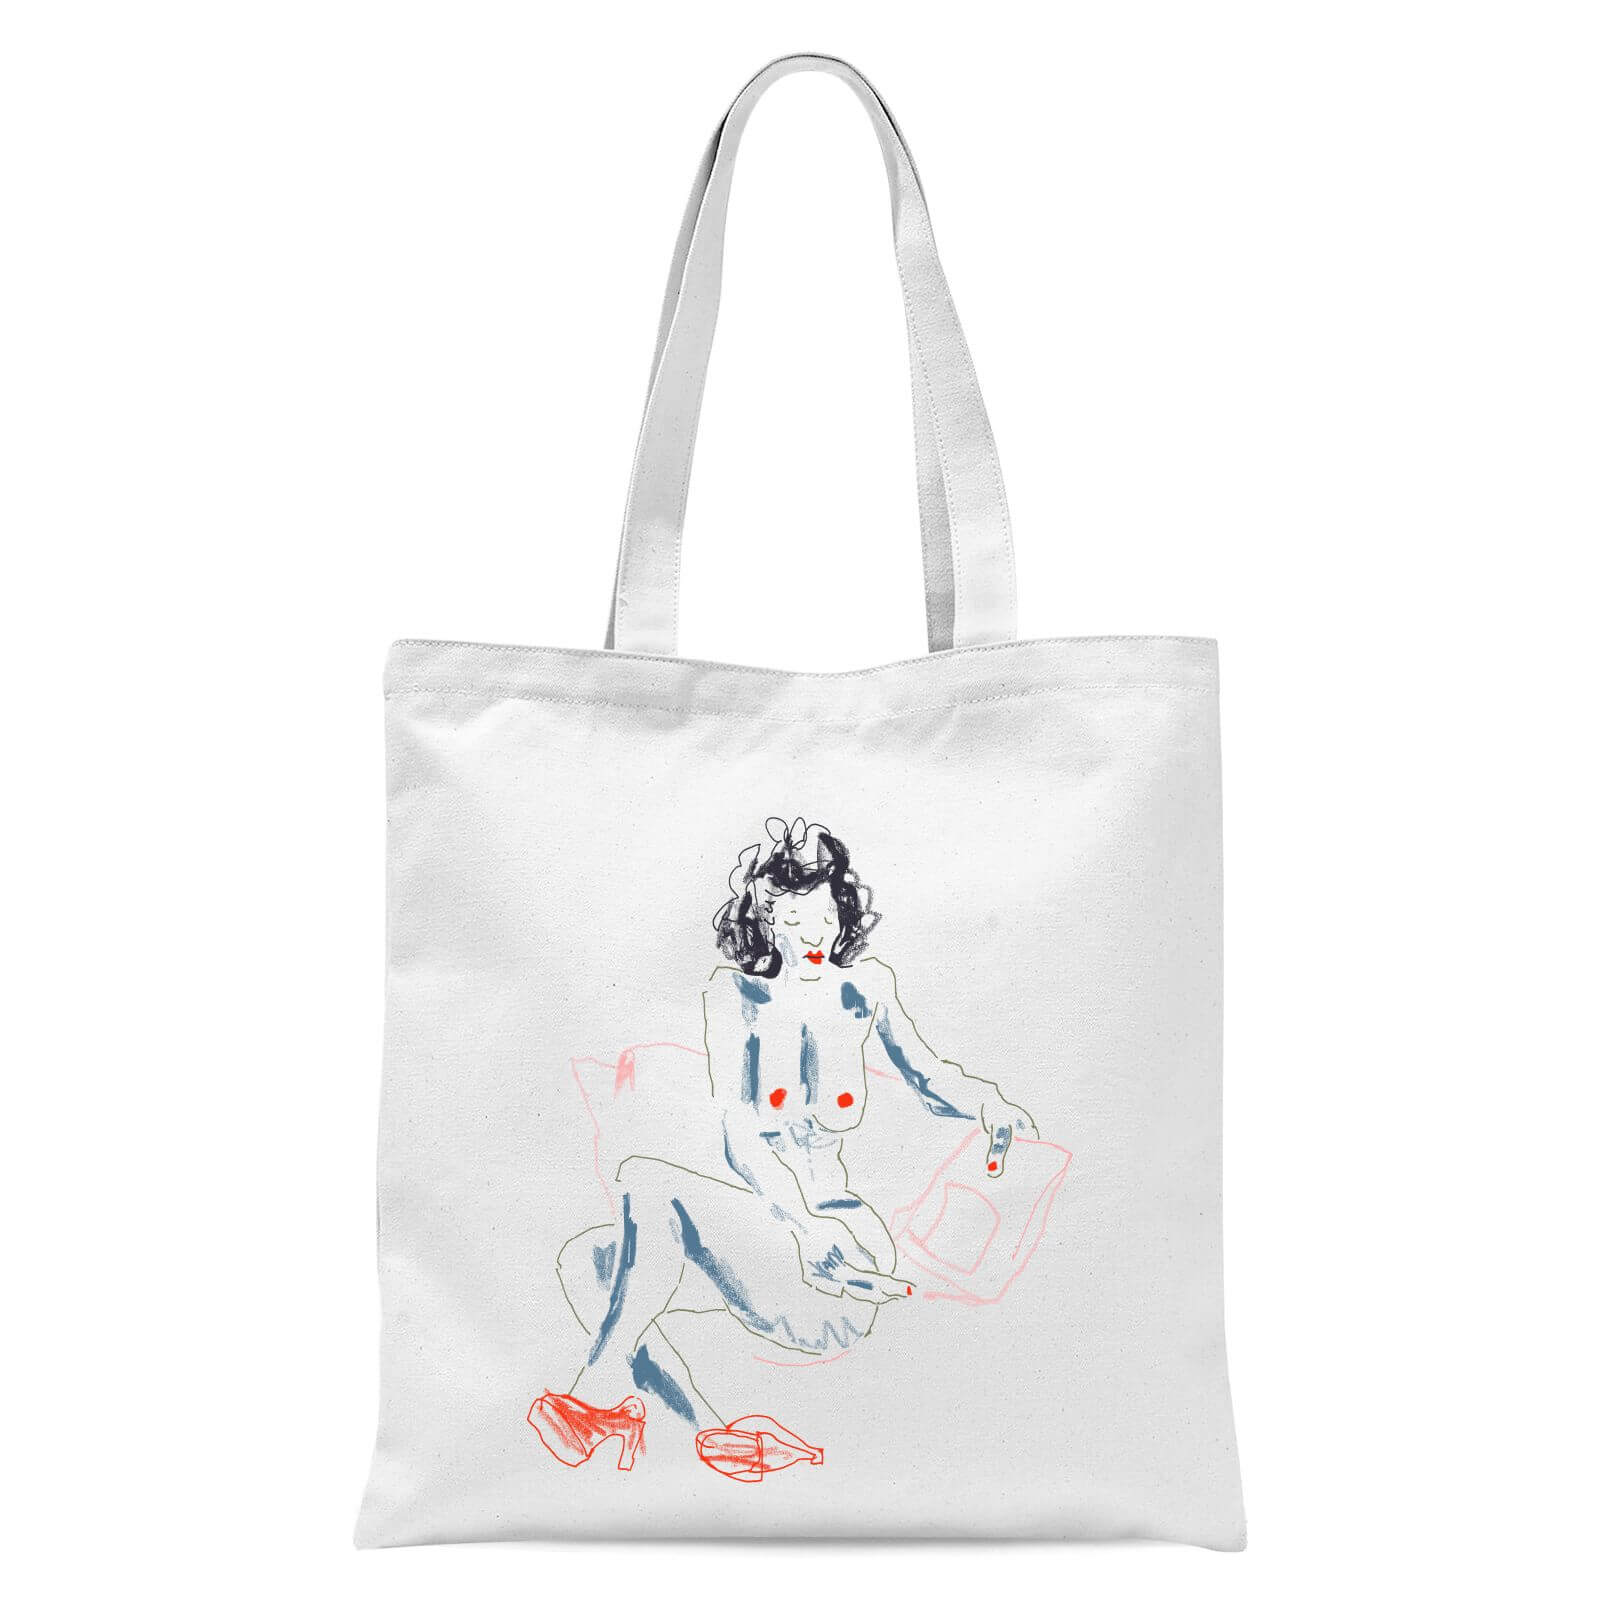 Girl With A Magazine Light Tote Bag - White